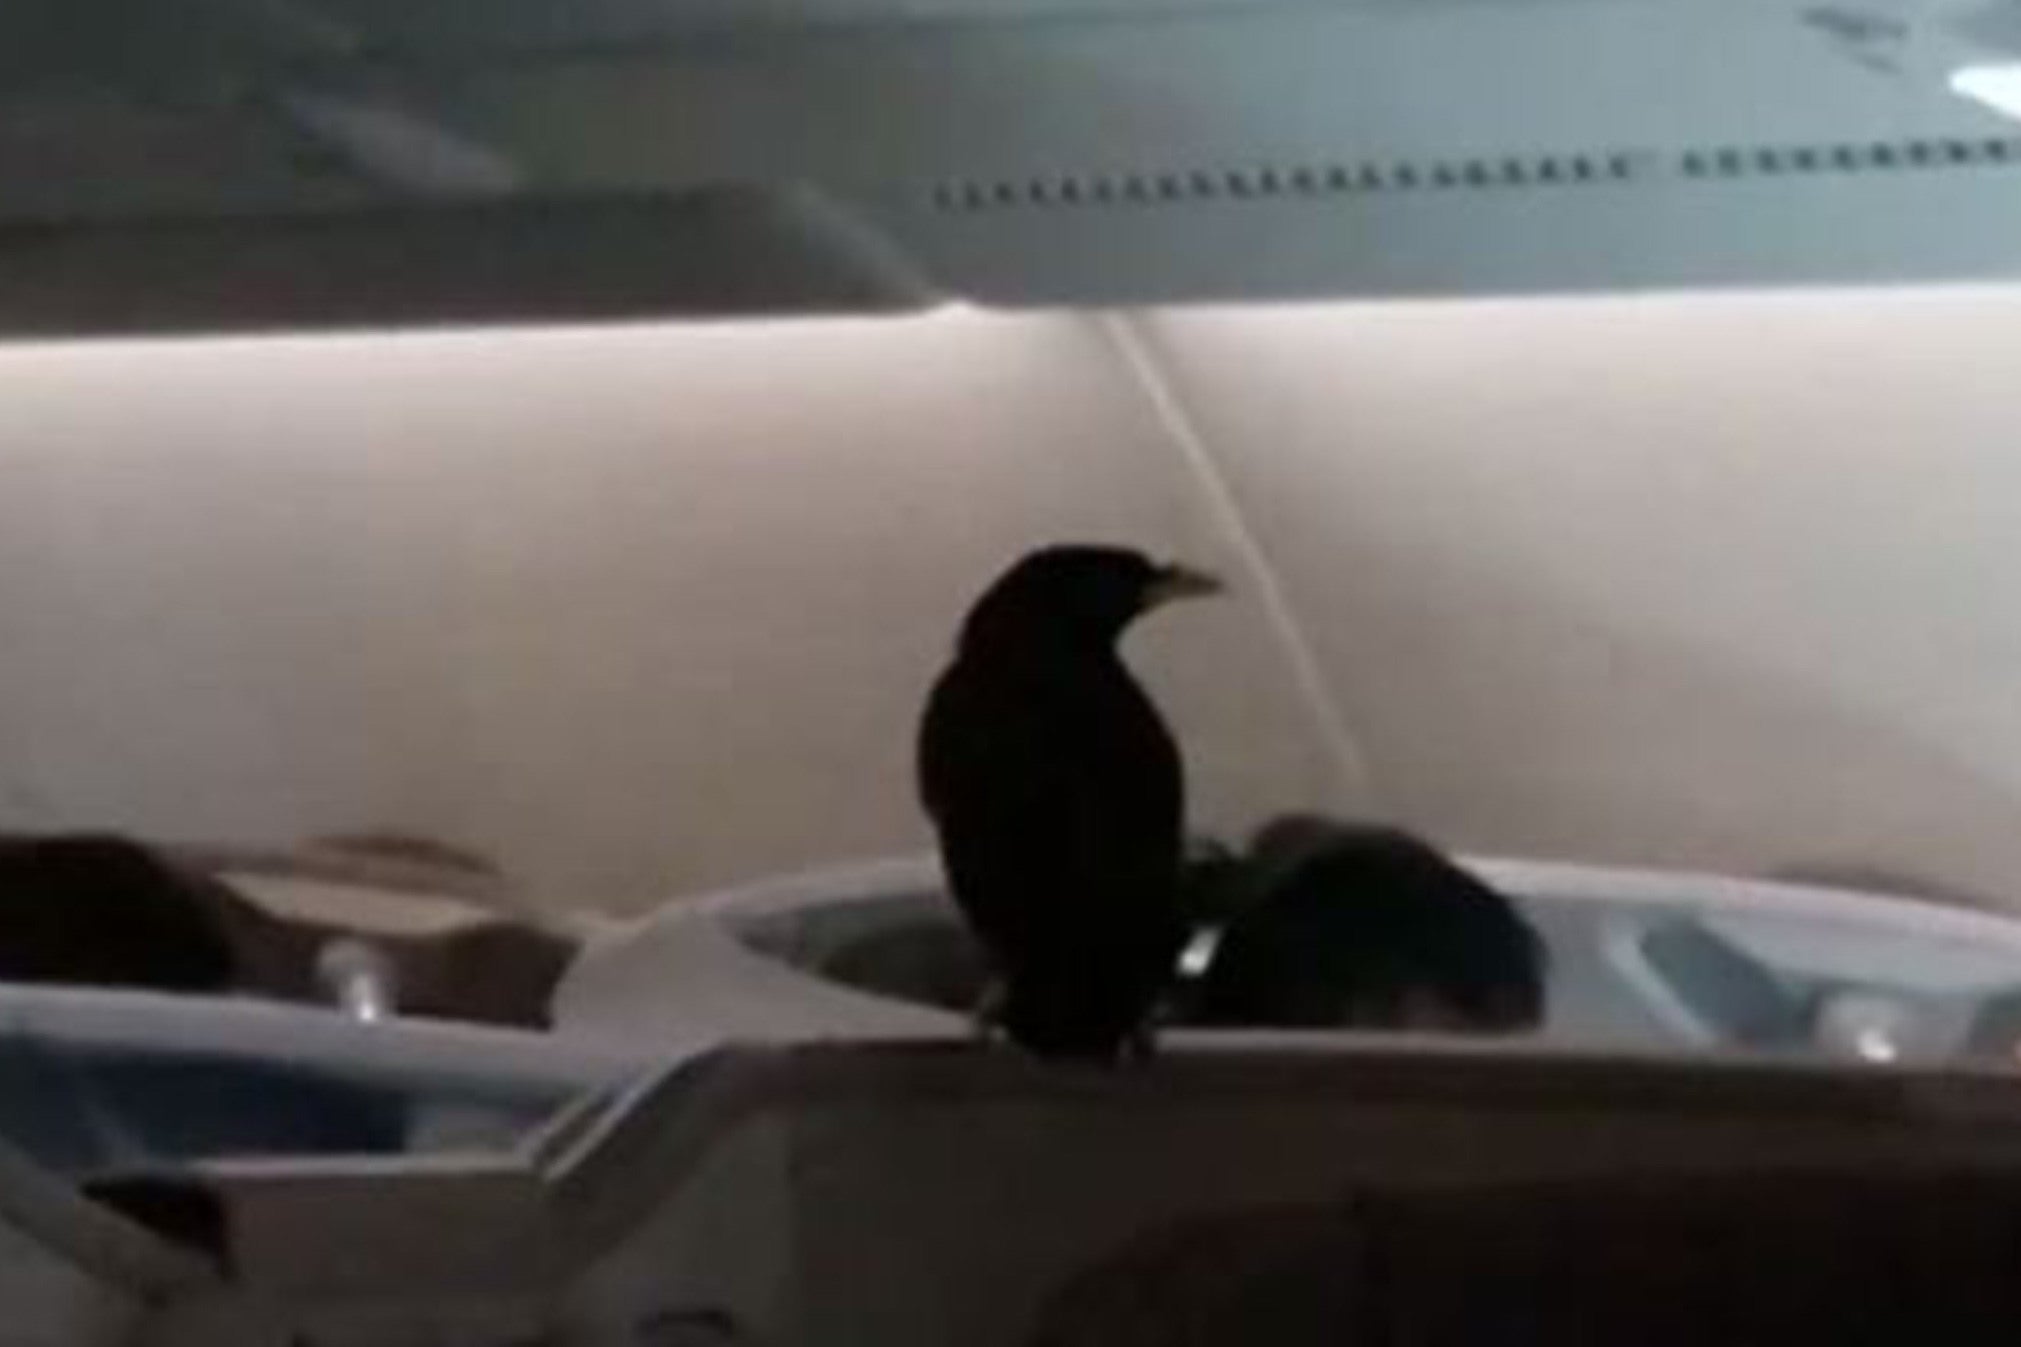 The mynah bird was discovered in business class